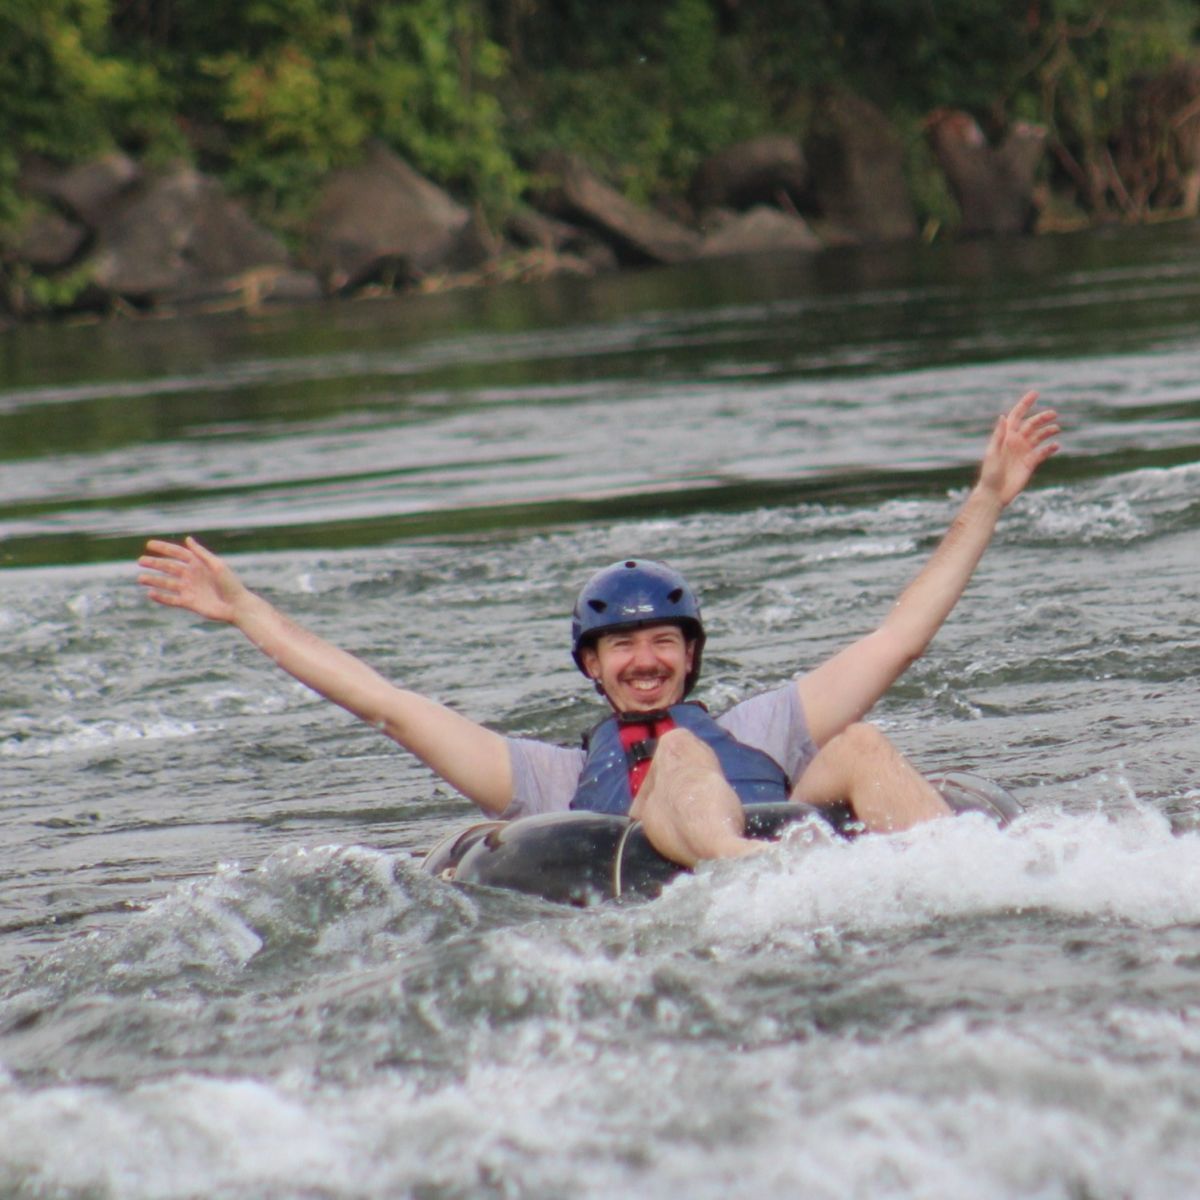 Man in hard hat with arms raised as he moves down river on the Nile while sitting in an inflated tube